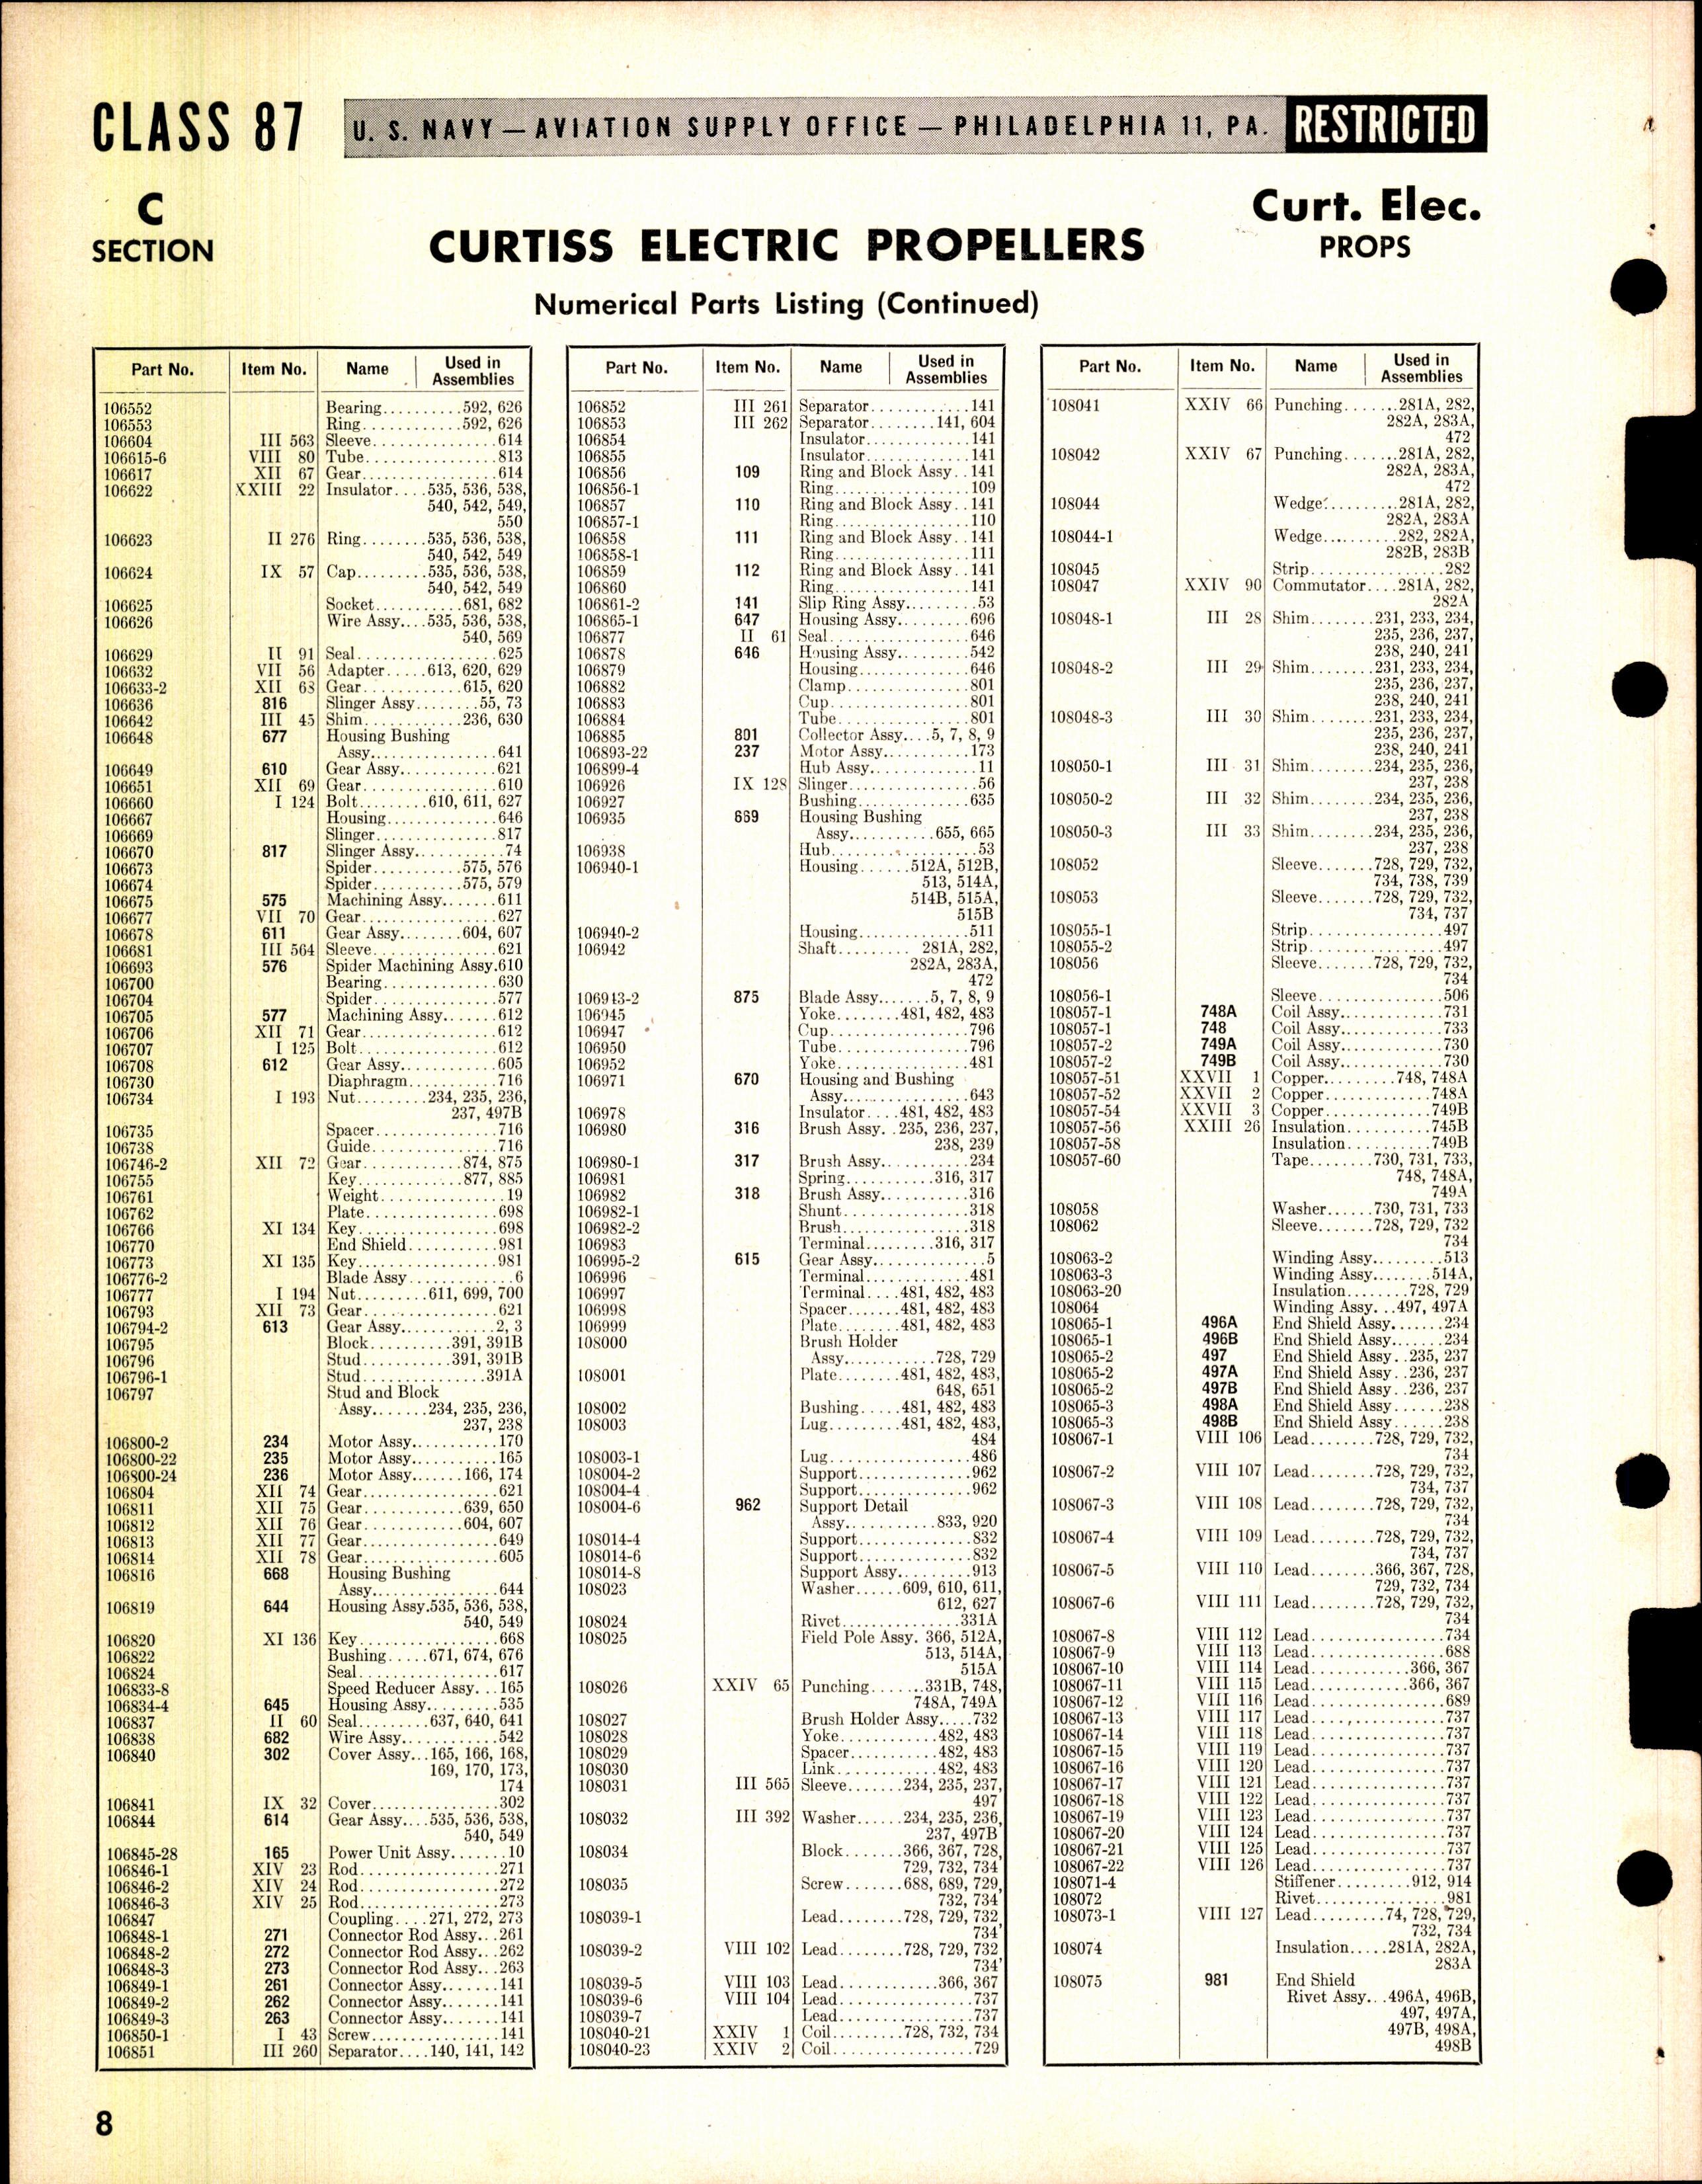 Sample page 8 from AirCorps Library document: Numerical Listing